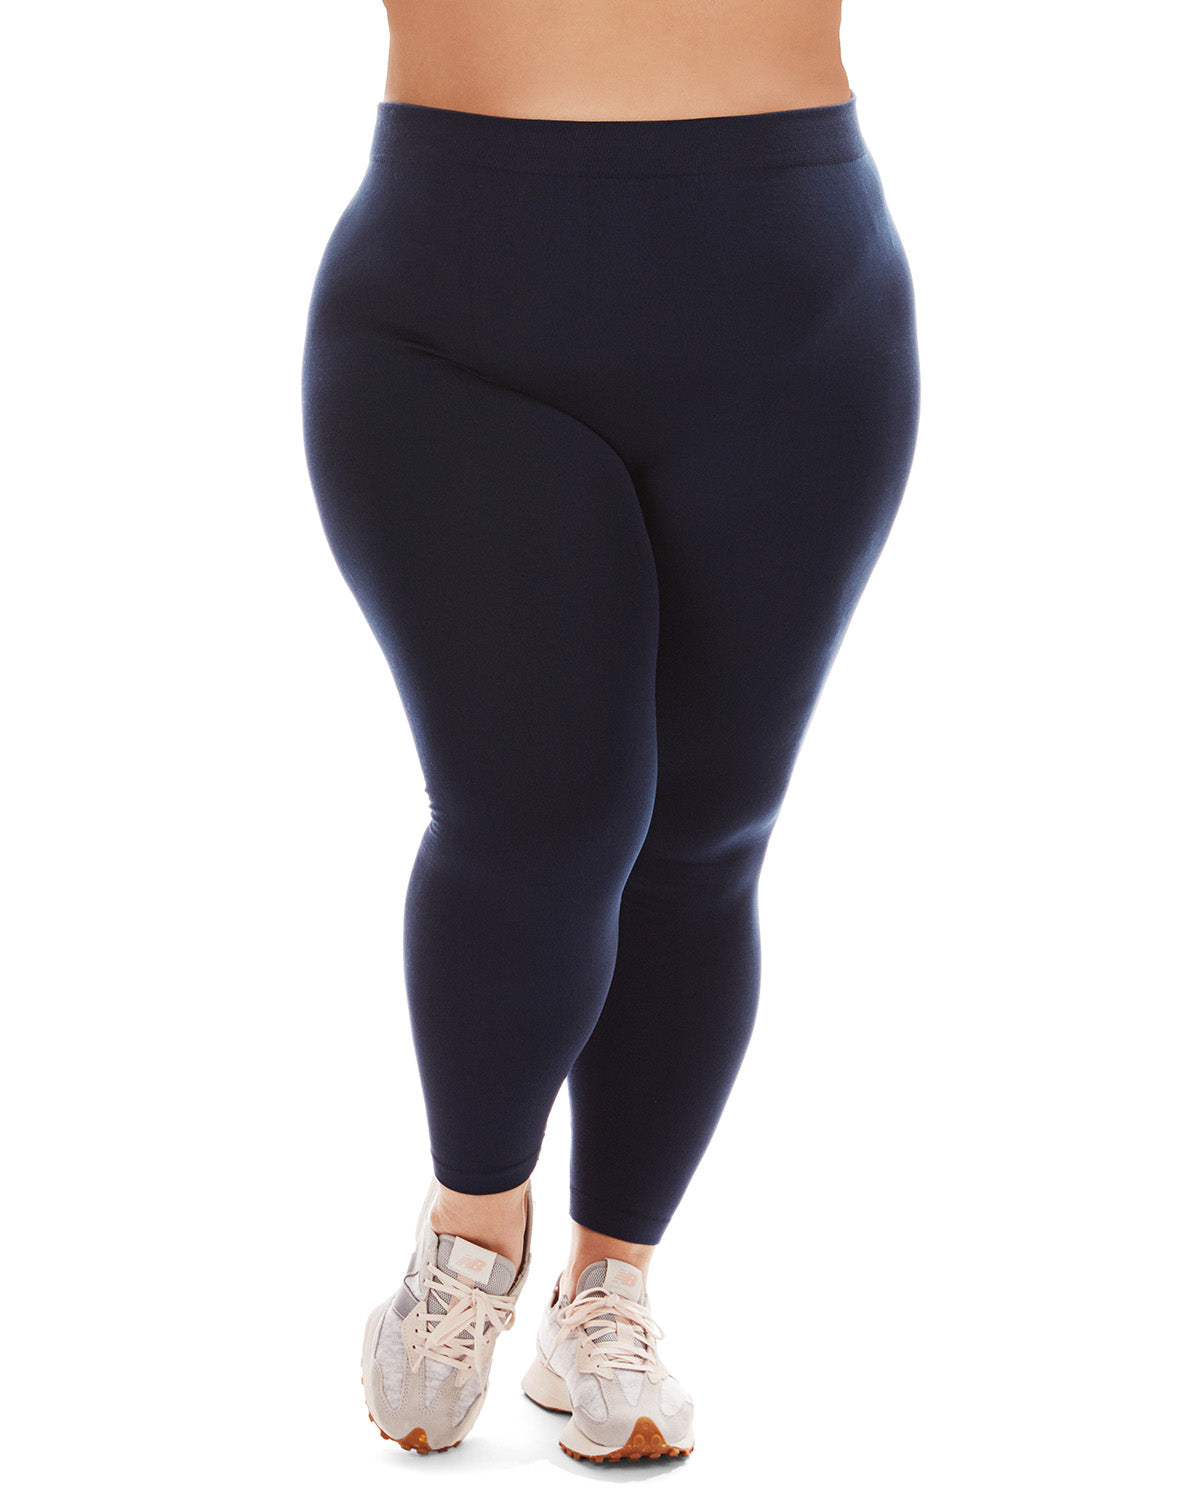 Women's New Mix Brand Solid Color Seamless Fleece Lined Leggings. - Fleece  Lined - 2 Elastic Waistband - Full-Length - One size fits most 0-14 -  Inseam Approximately 26 L - 92% Nylon / 8% Spandex, 7316613